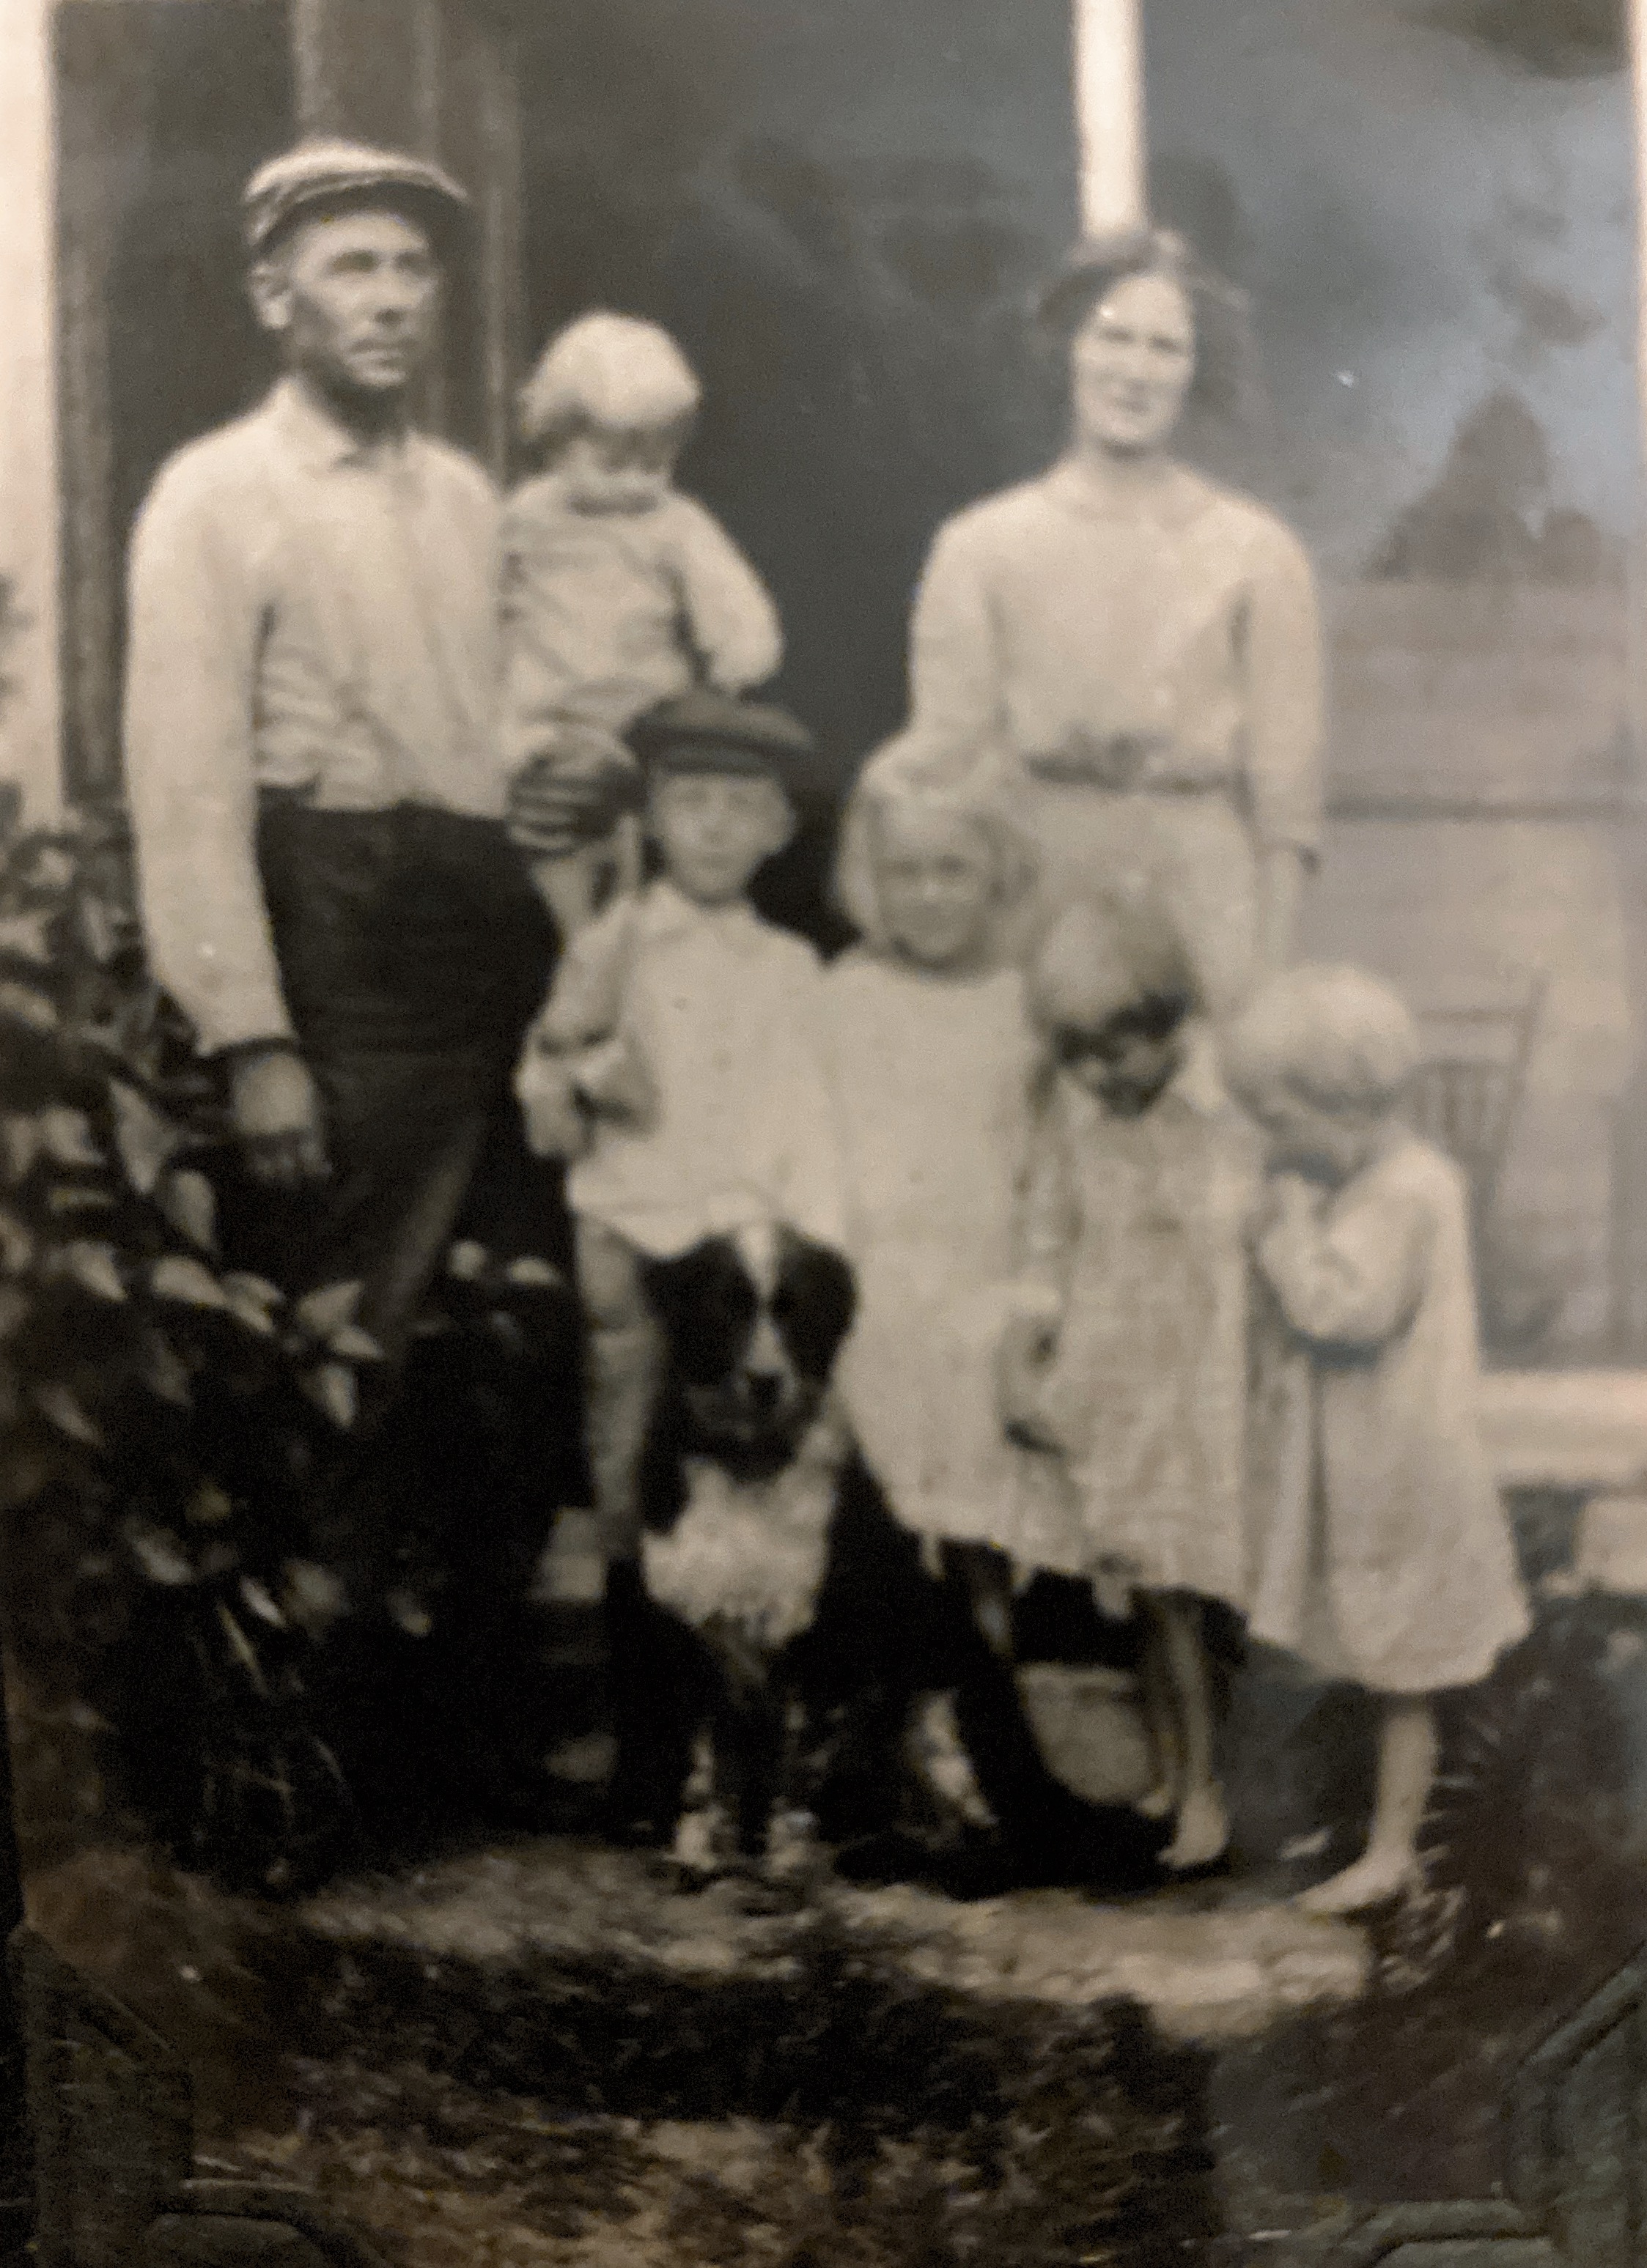 Martin Matthew Tousgaard, Sophia Wilhelmina Bohnert Tousgaard and the “Tousgaard stairsteps”, their children: Carol Marie, the youngest at about 18 mos., in her father’s arms, Gerald Martin aged , Vee Esther aged , Elsie Marian aged , and Dorothy Barbara aged 3.5. 